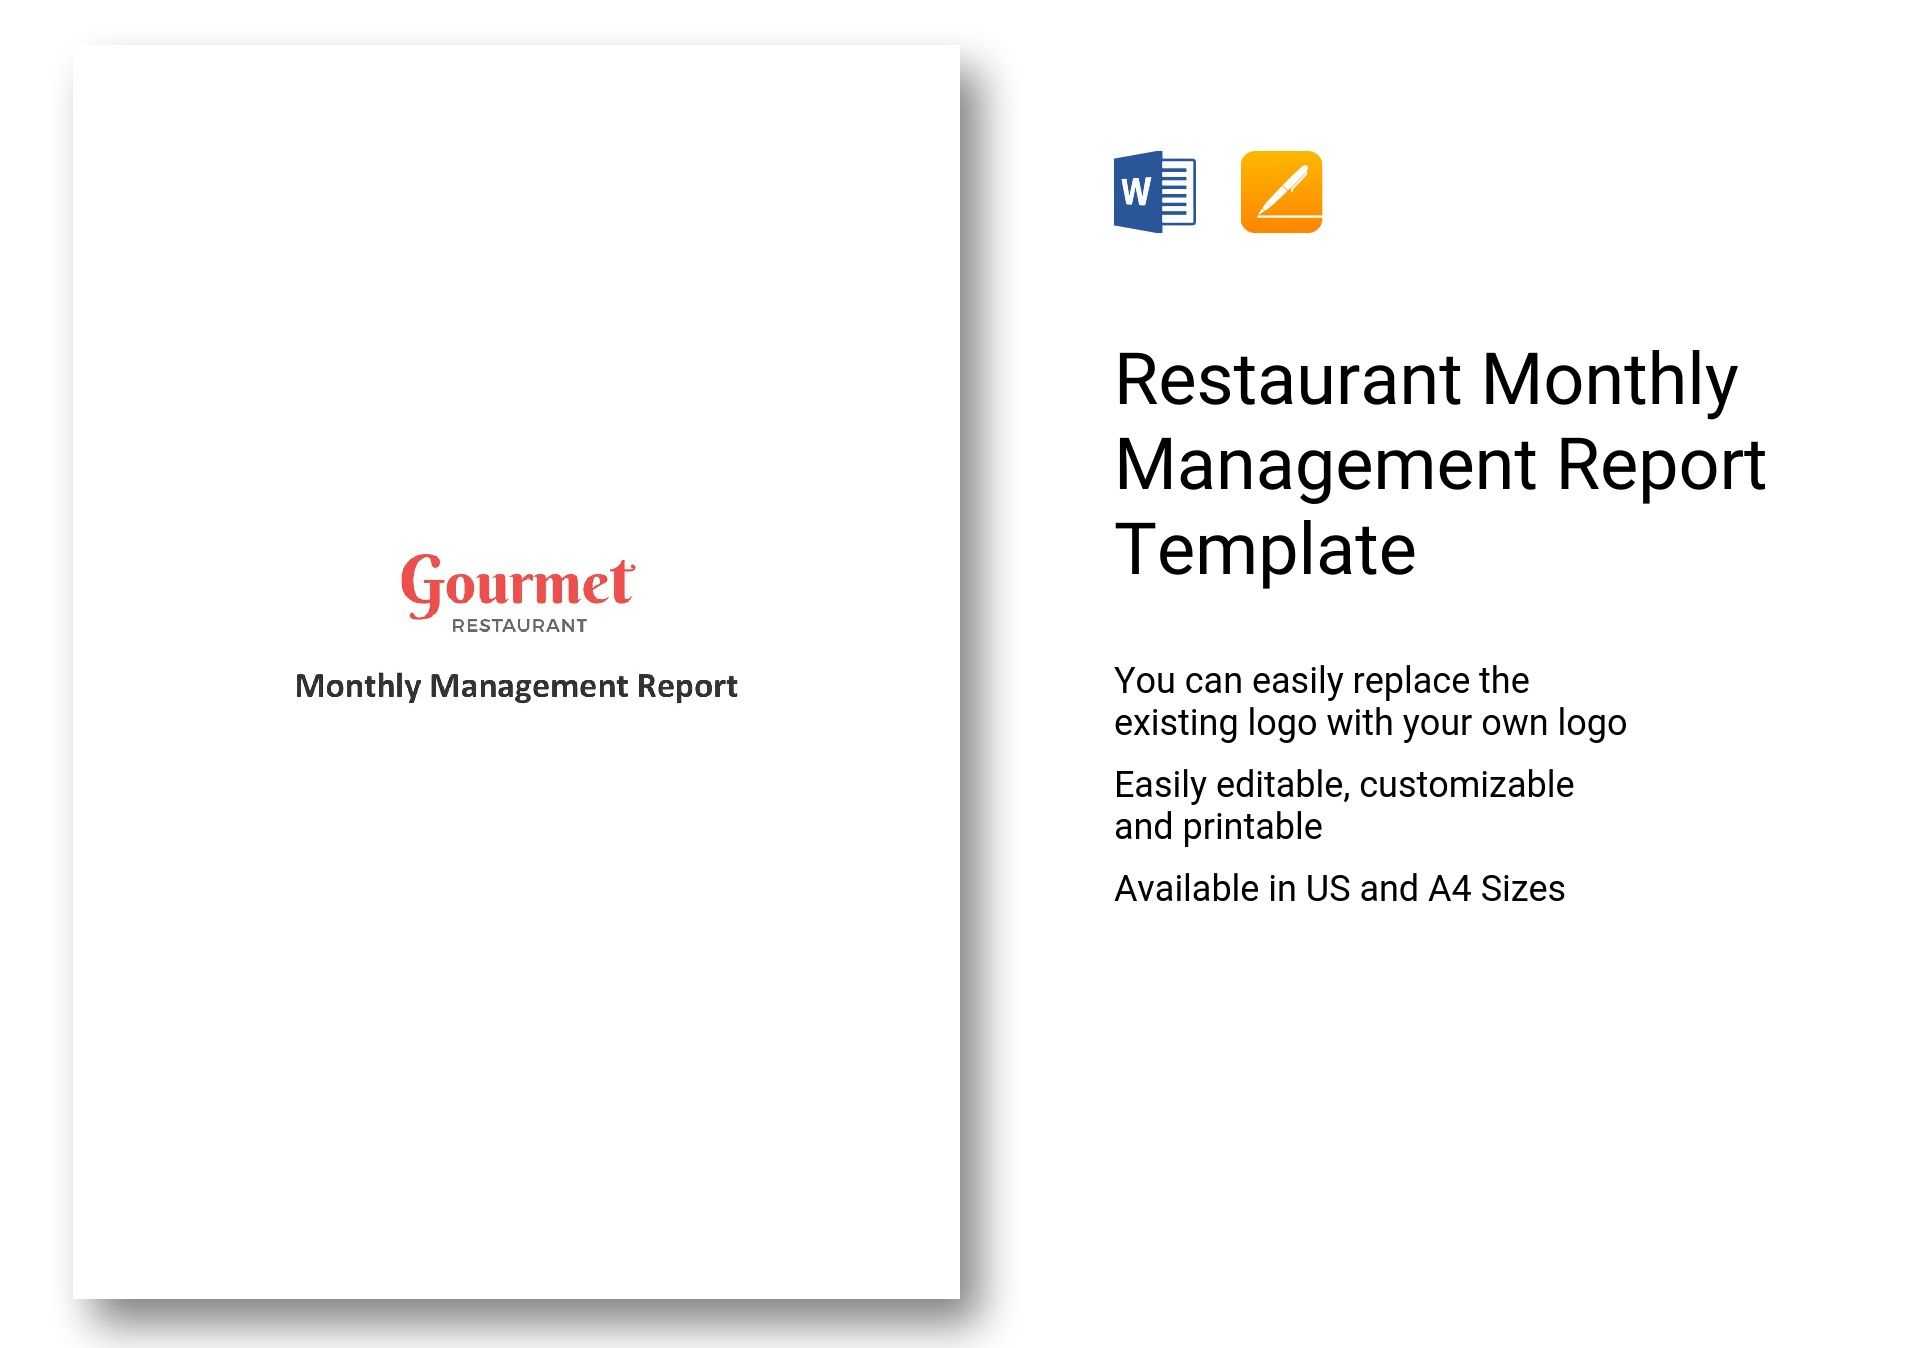 Restaurant Monthly Management Report Template In Word, Apple With It Management Report Template